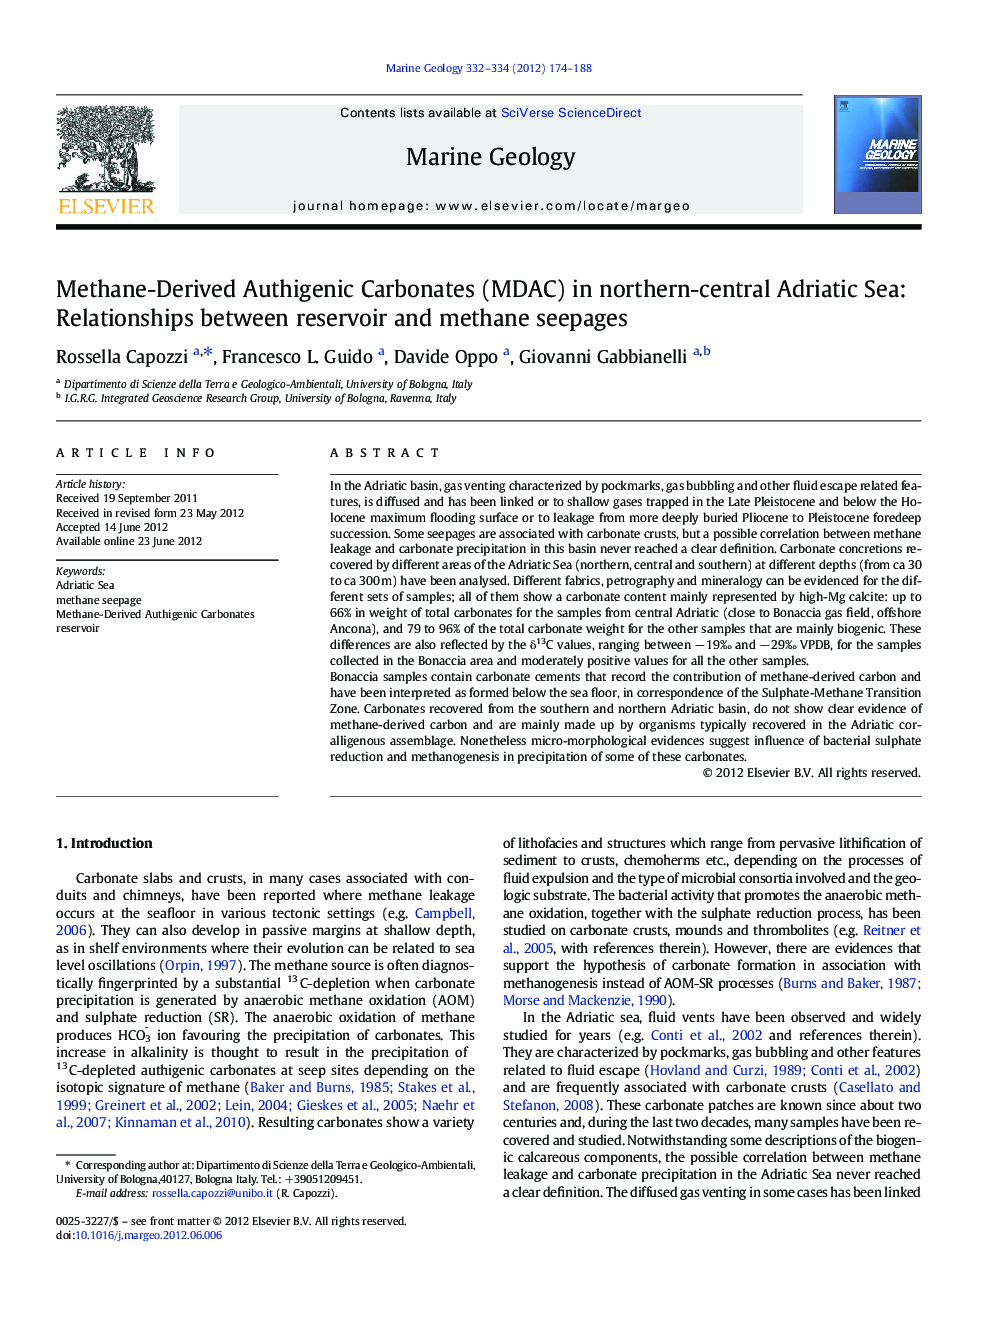 Methane-Derived Authigenic Carbonates (MDAC) in northern-central Adriatic Sea: Relationships between reservoir and methane seepages